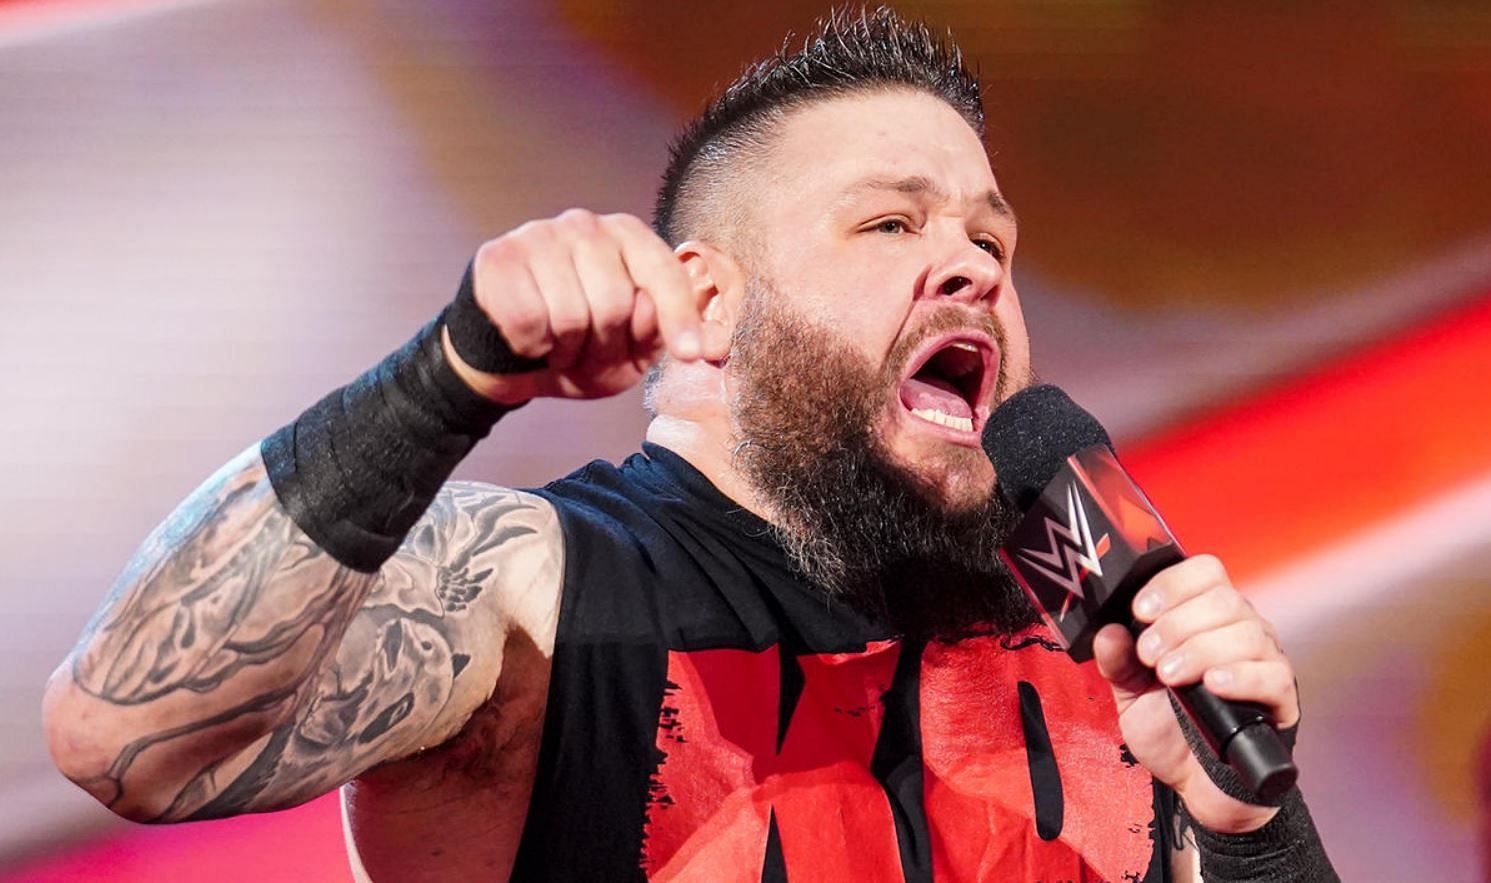 Kevin Owens is reportedly in line to challenge Roman Reigns at Royal Rumble next year